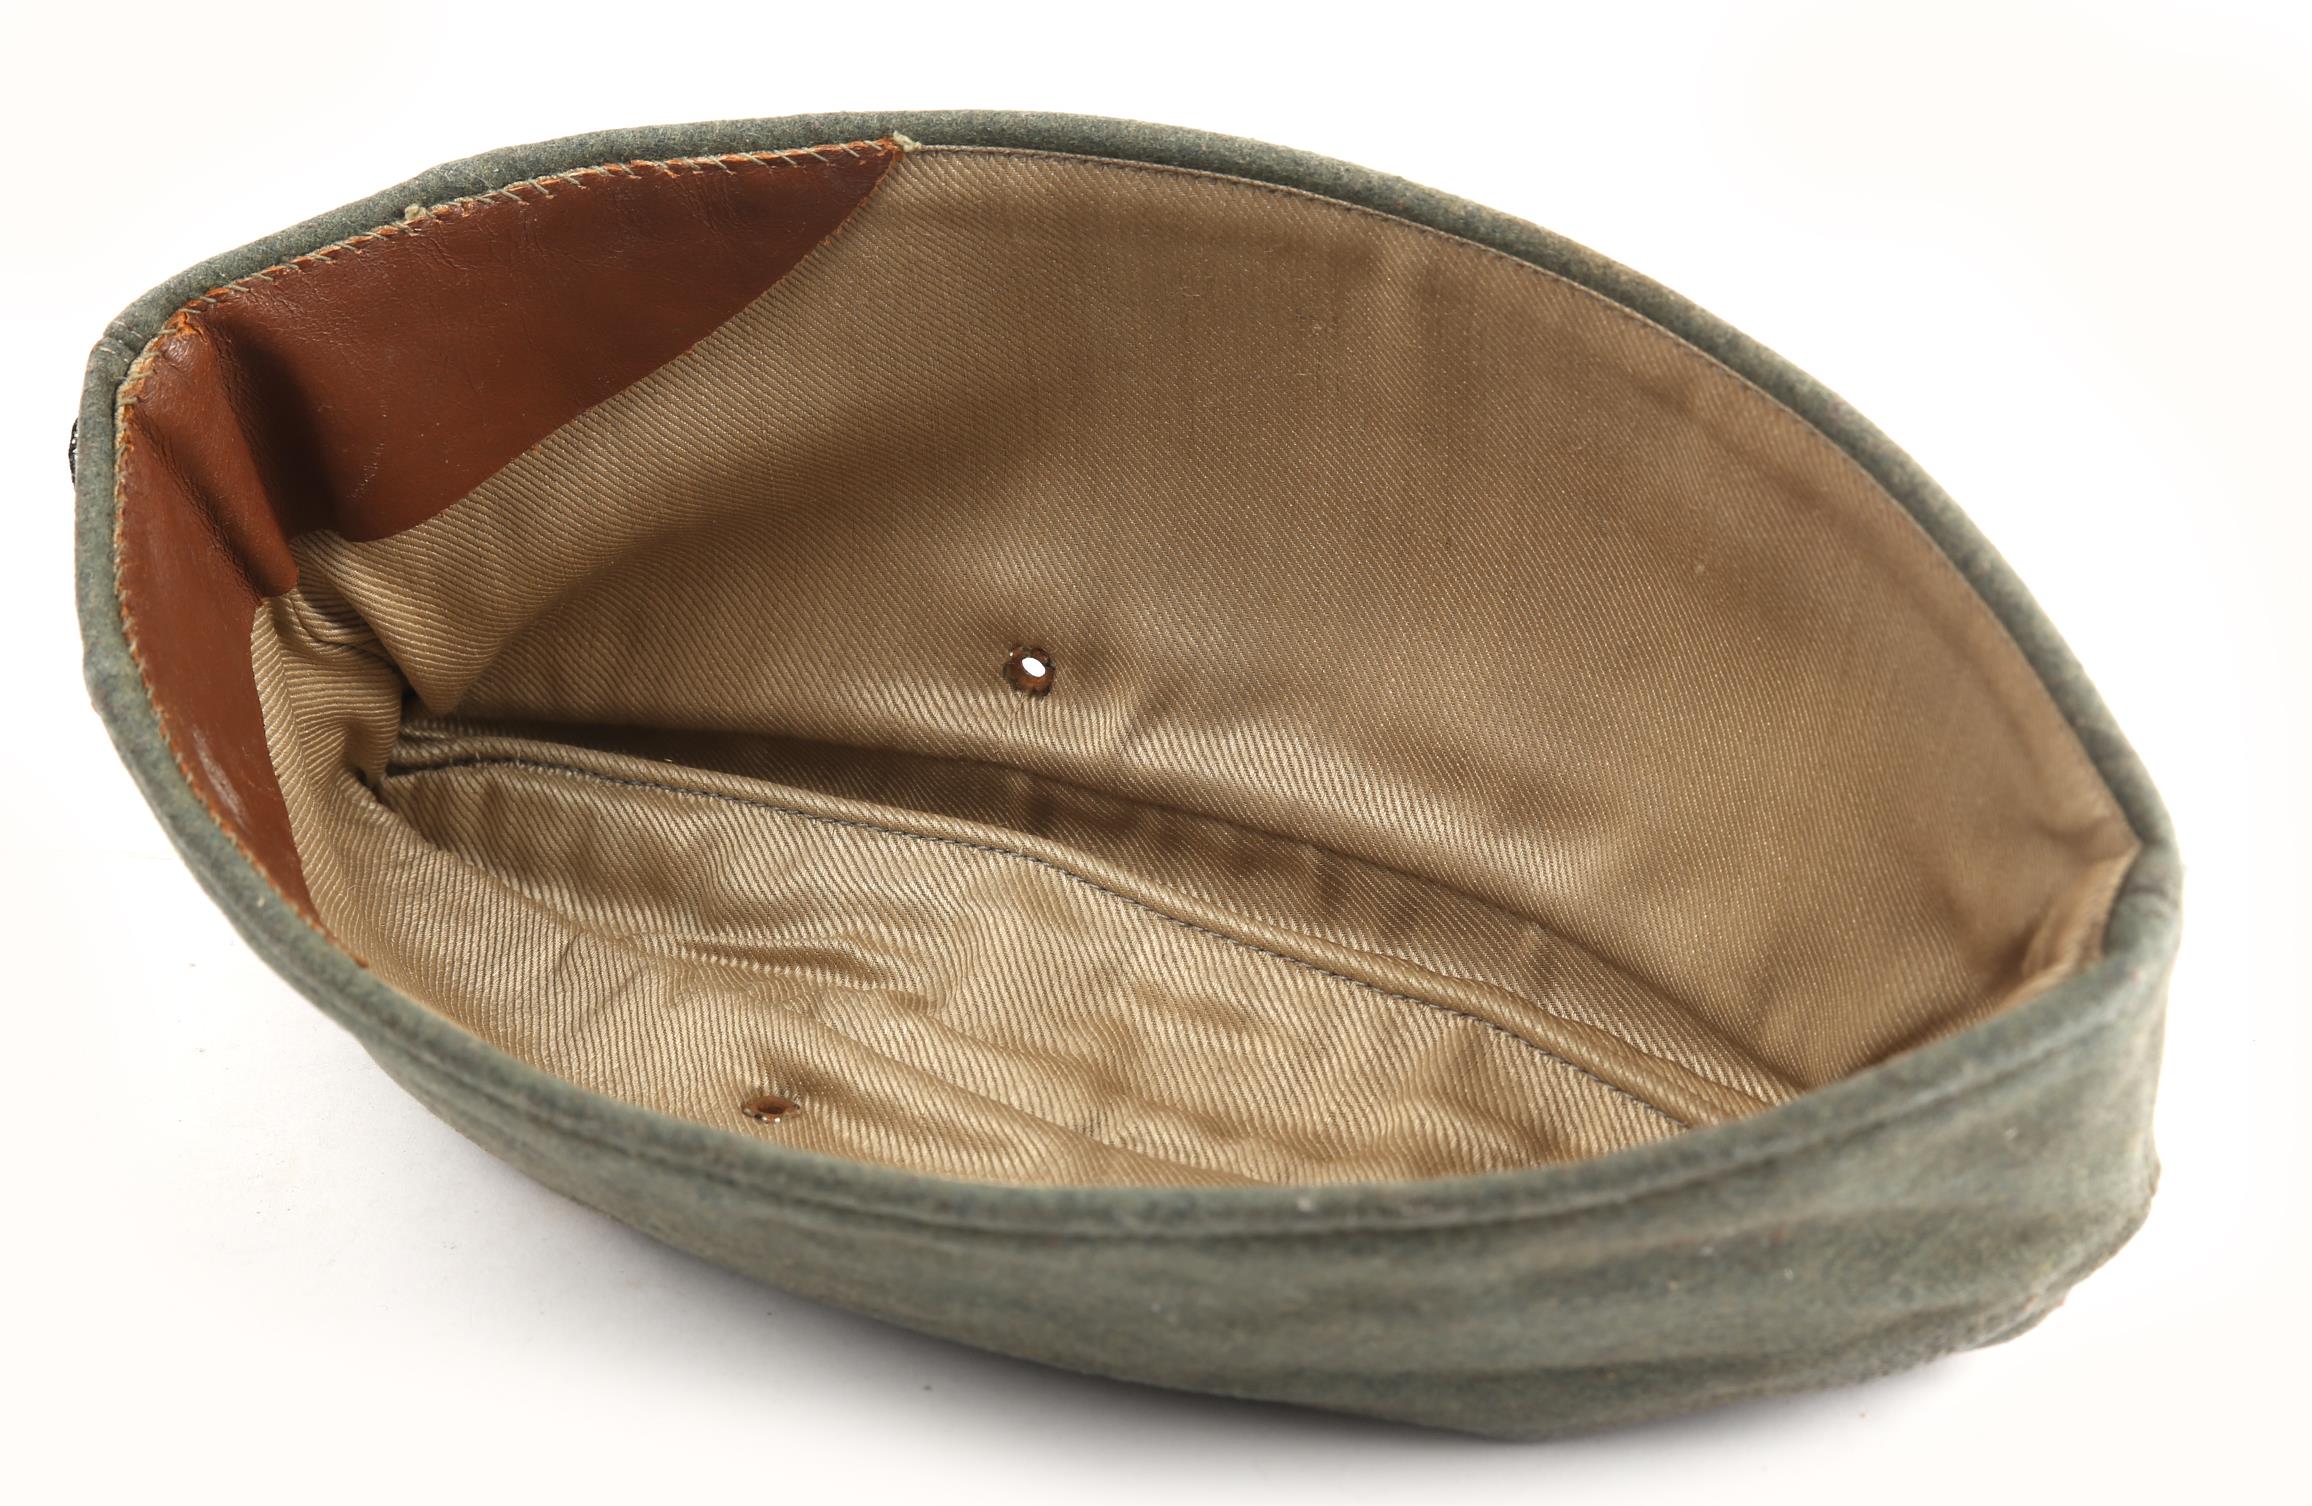 1933-42 German General's side cap. A privately purchased M38 field cap, piped in gilt bullion. - Image 3 of 4